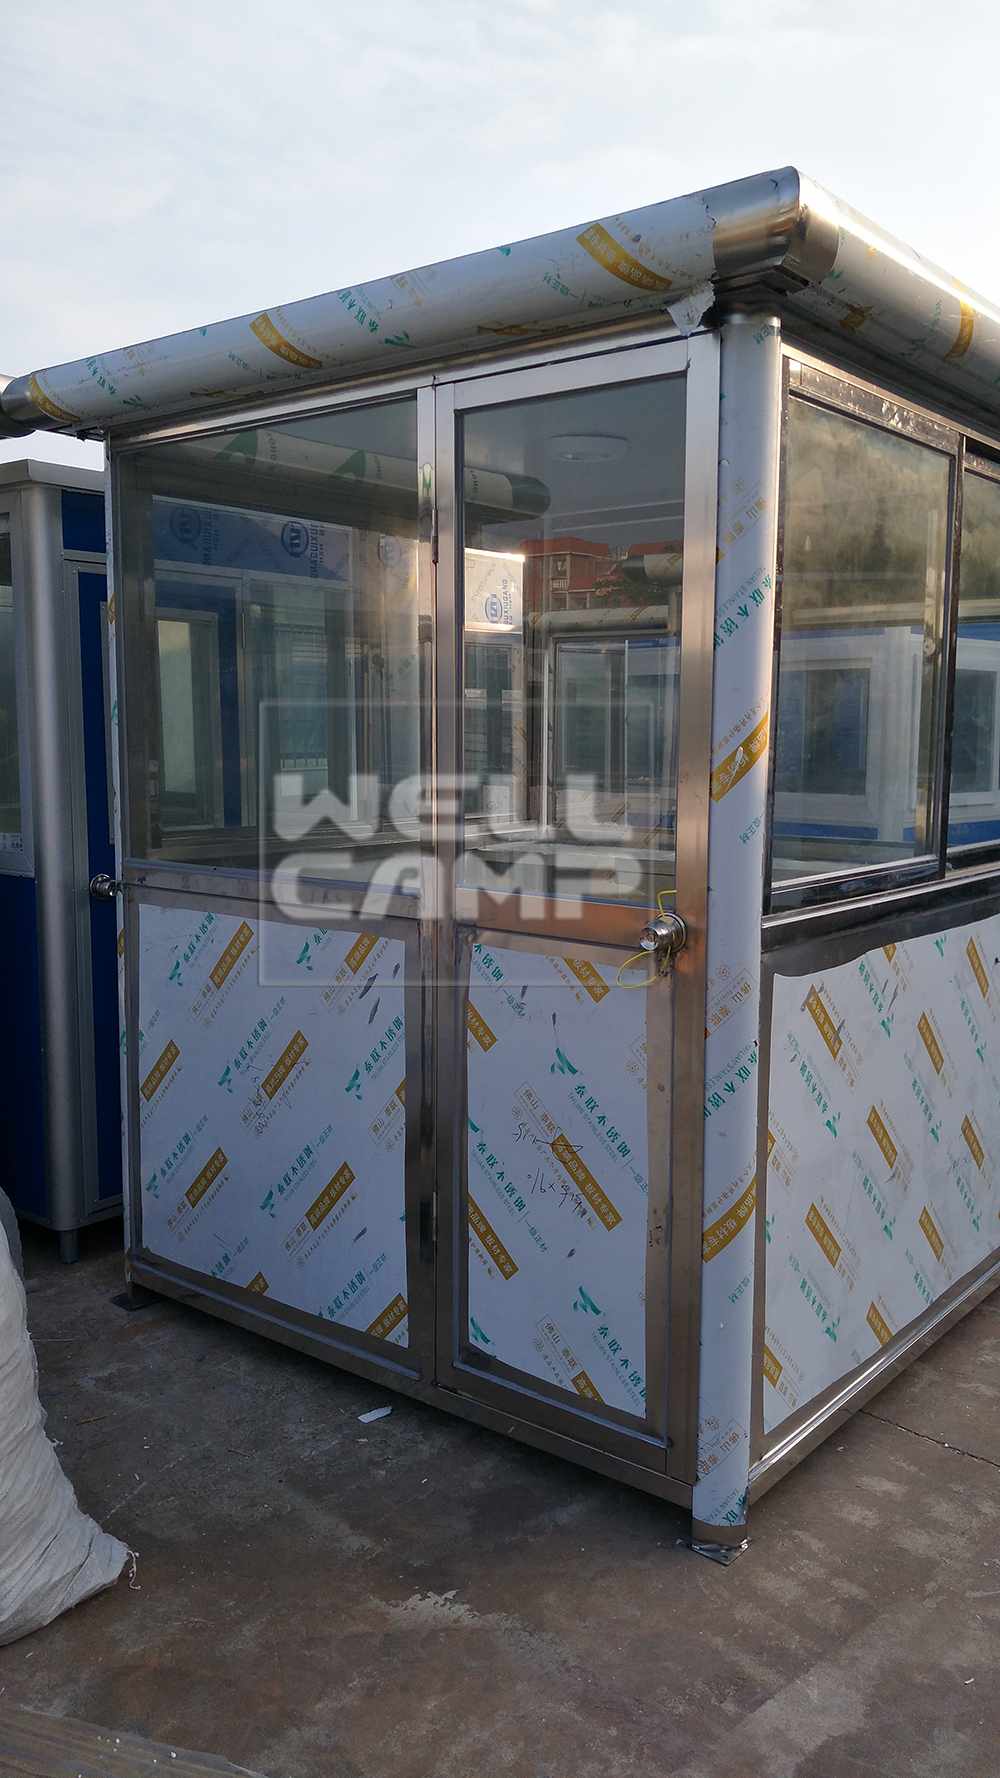 news-The guide of Fast Built Living Detachable Container Homes, Wellcamp C-12-WELLCAMP, WELLCAMP pre